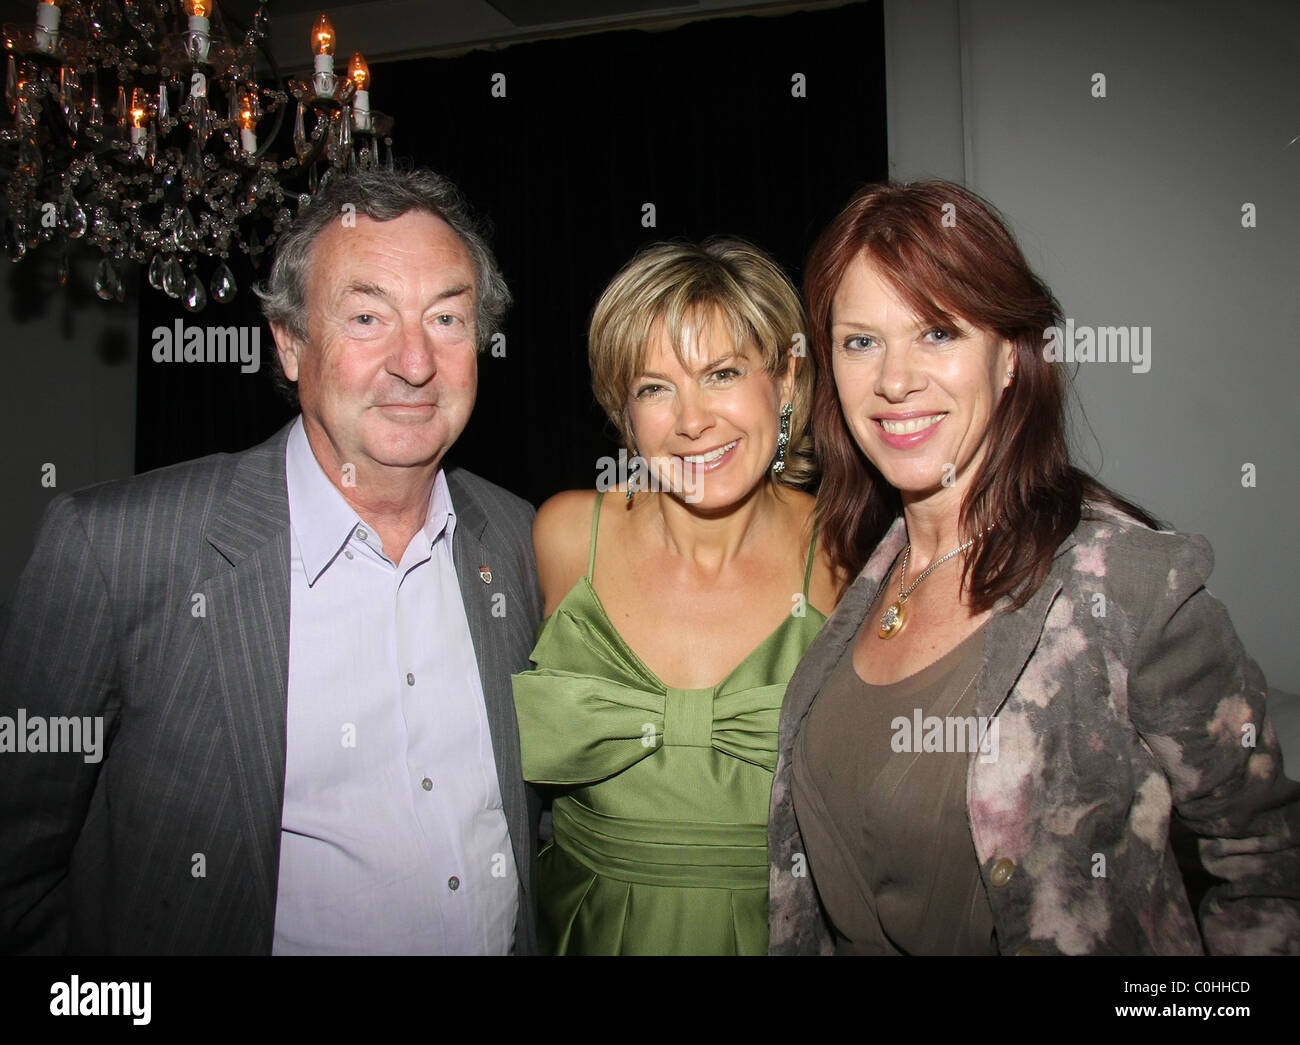 Penny Smith, Nick Mason and Annette Mason Penny Smith hosts a book party to launch her first novel 'Coming Up Next' held at the Stock Photo